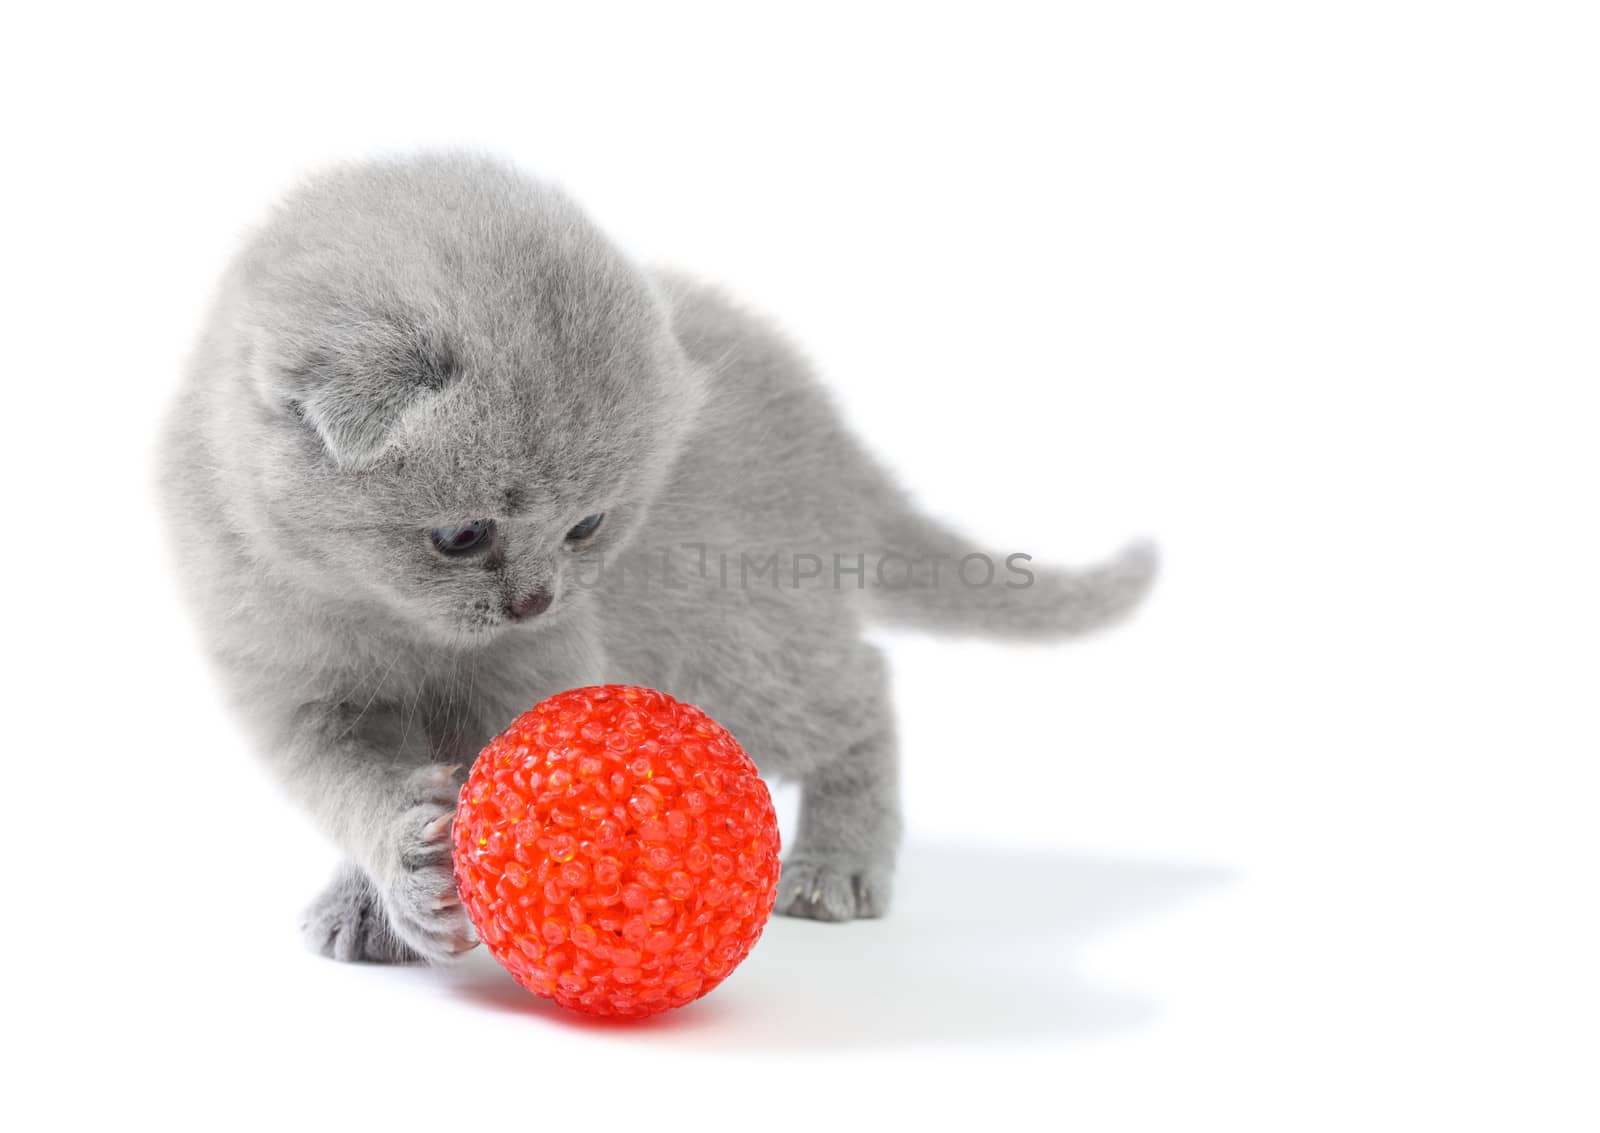 Little kitten playing with ball by dedmorozz